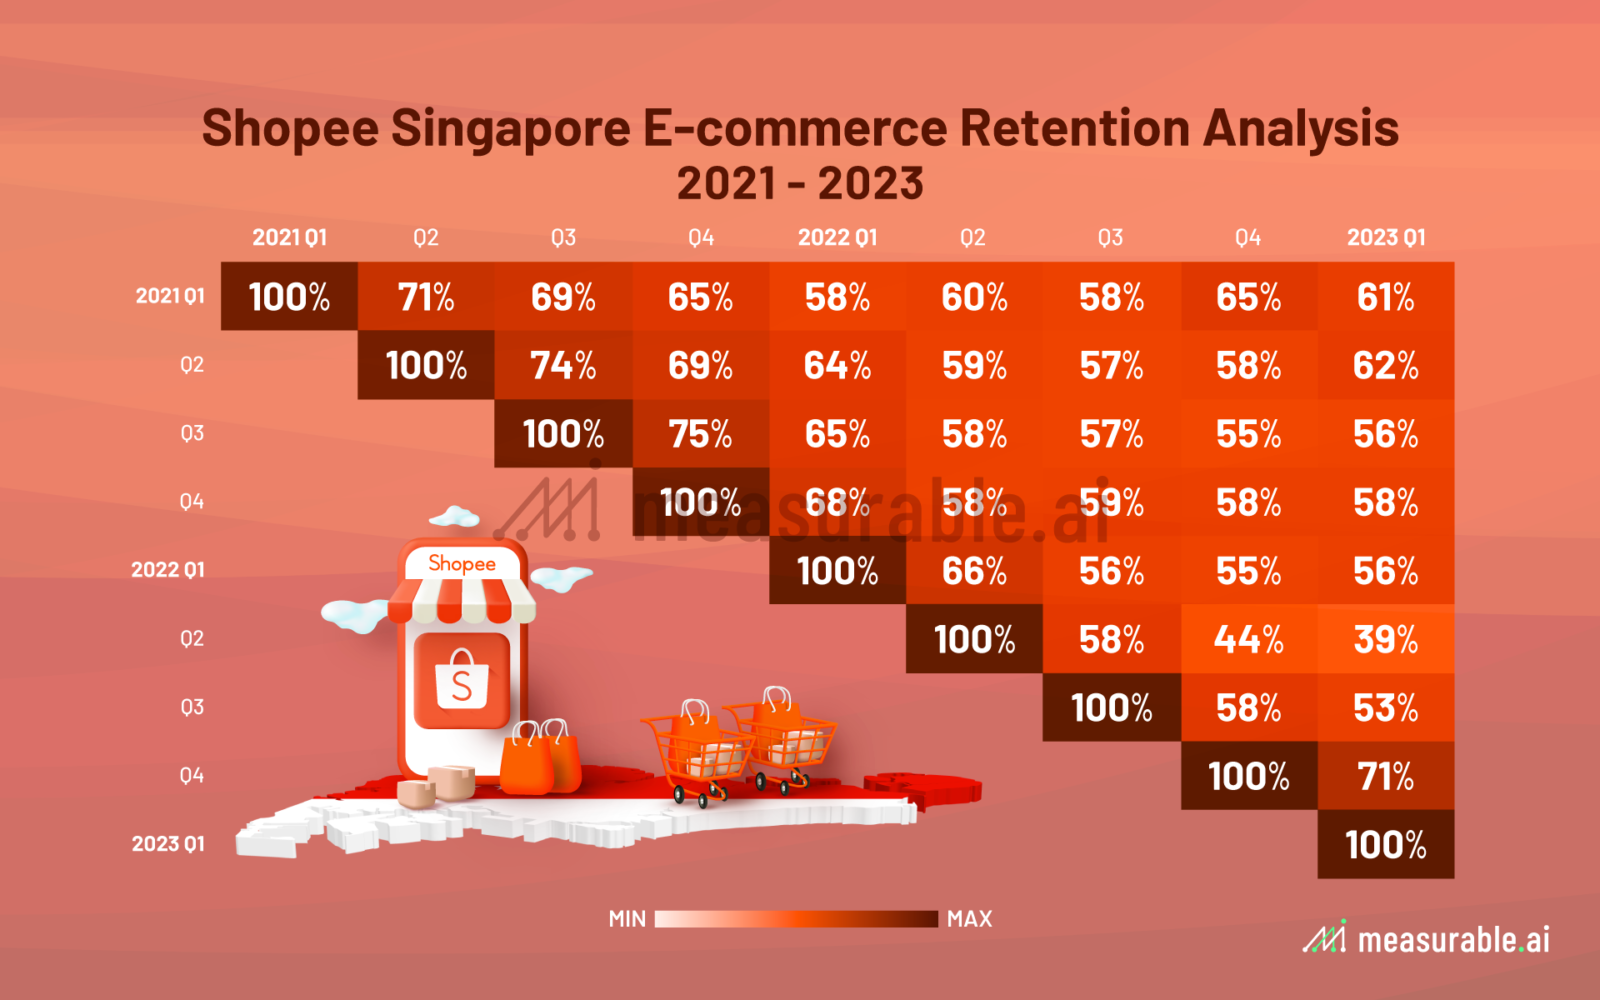 Focus: Singapore's Shopee changes the game in Brazil's e-commerce